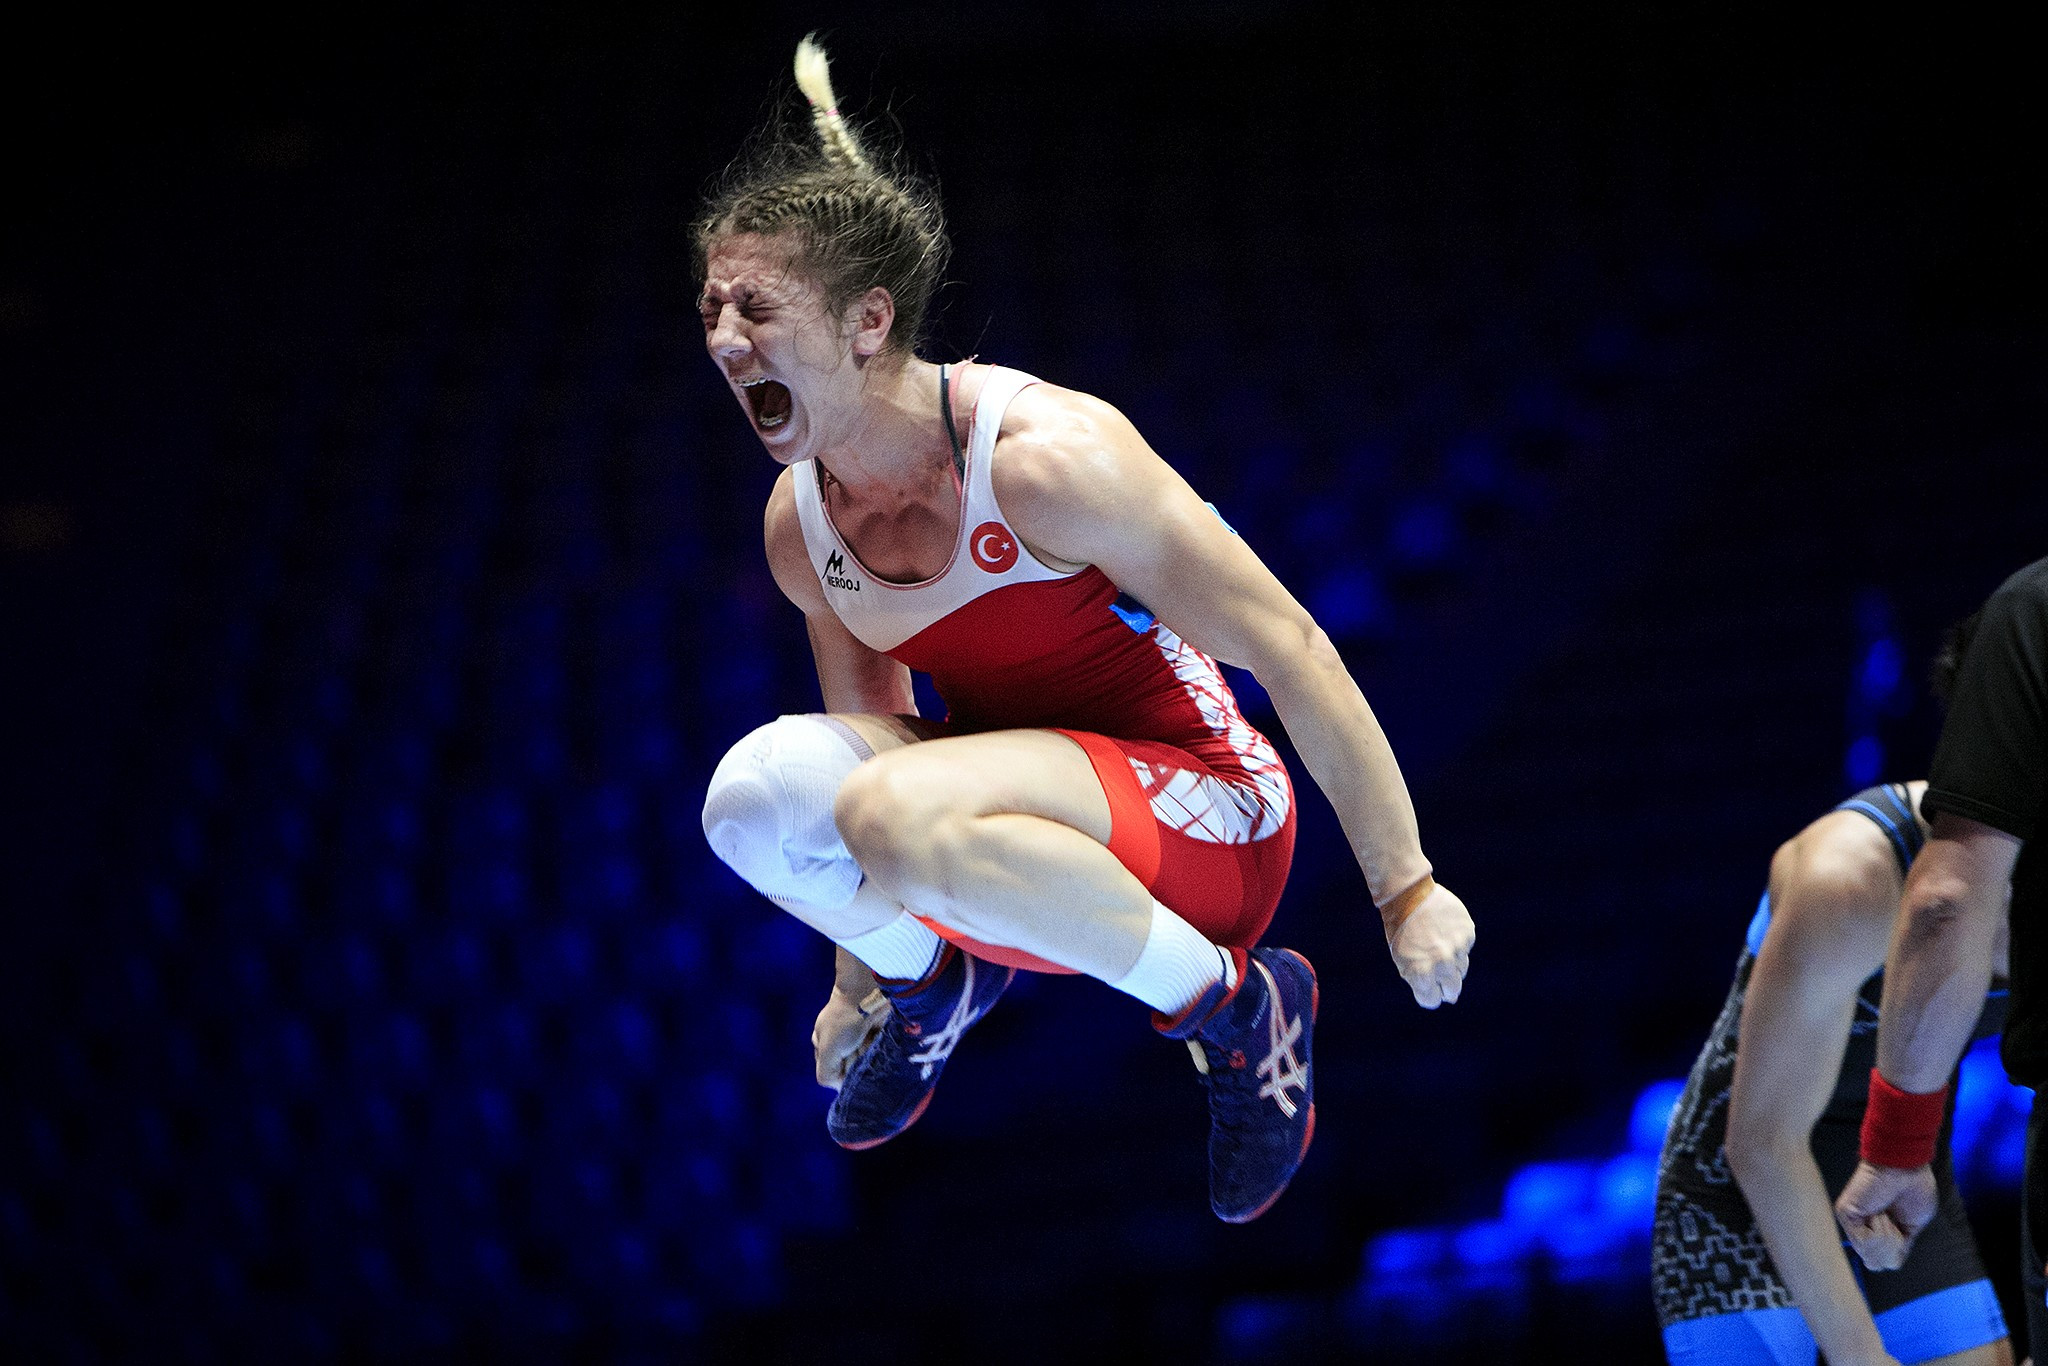 Women's wrestling begins with a bang at UWW World Championships